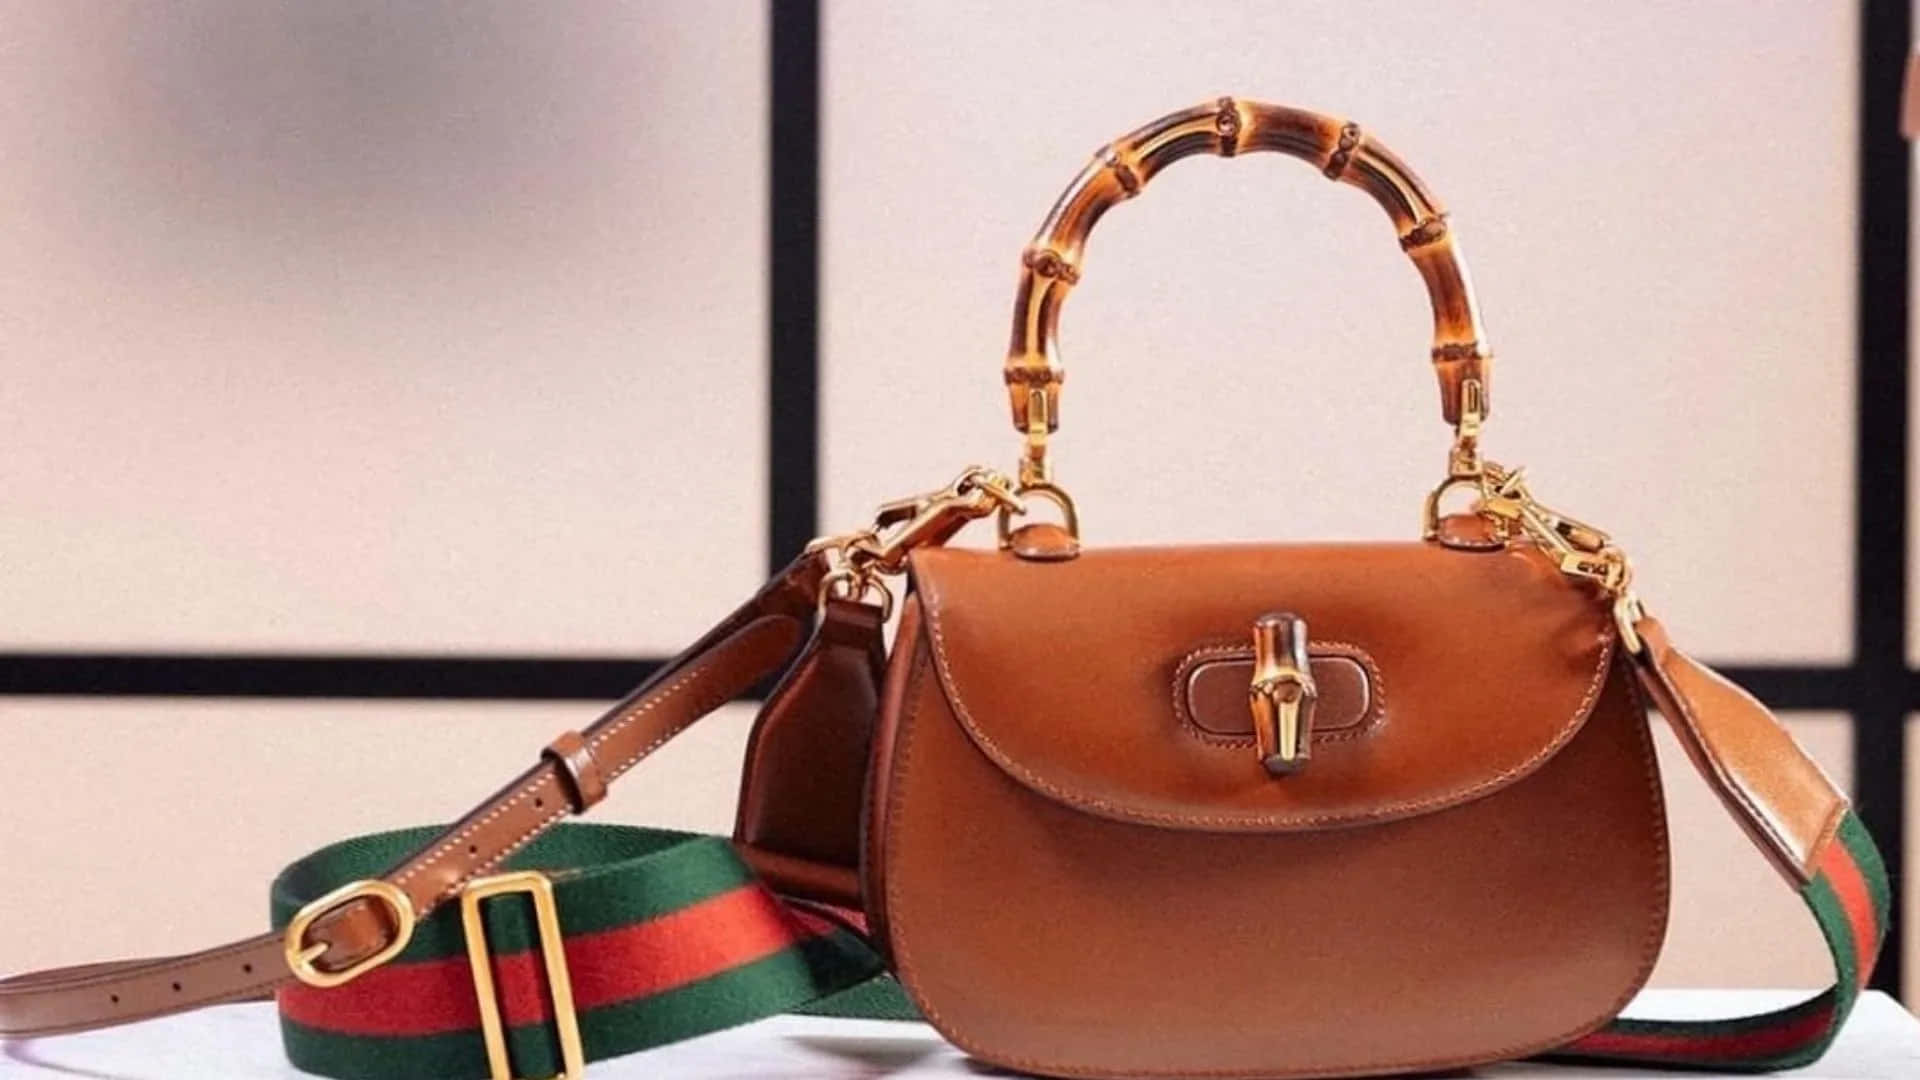 Luxury Redefined - A Brown Leather Gucci Bag in 4k Resolution Wallpaper